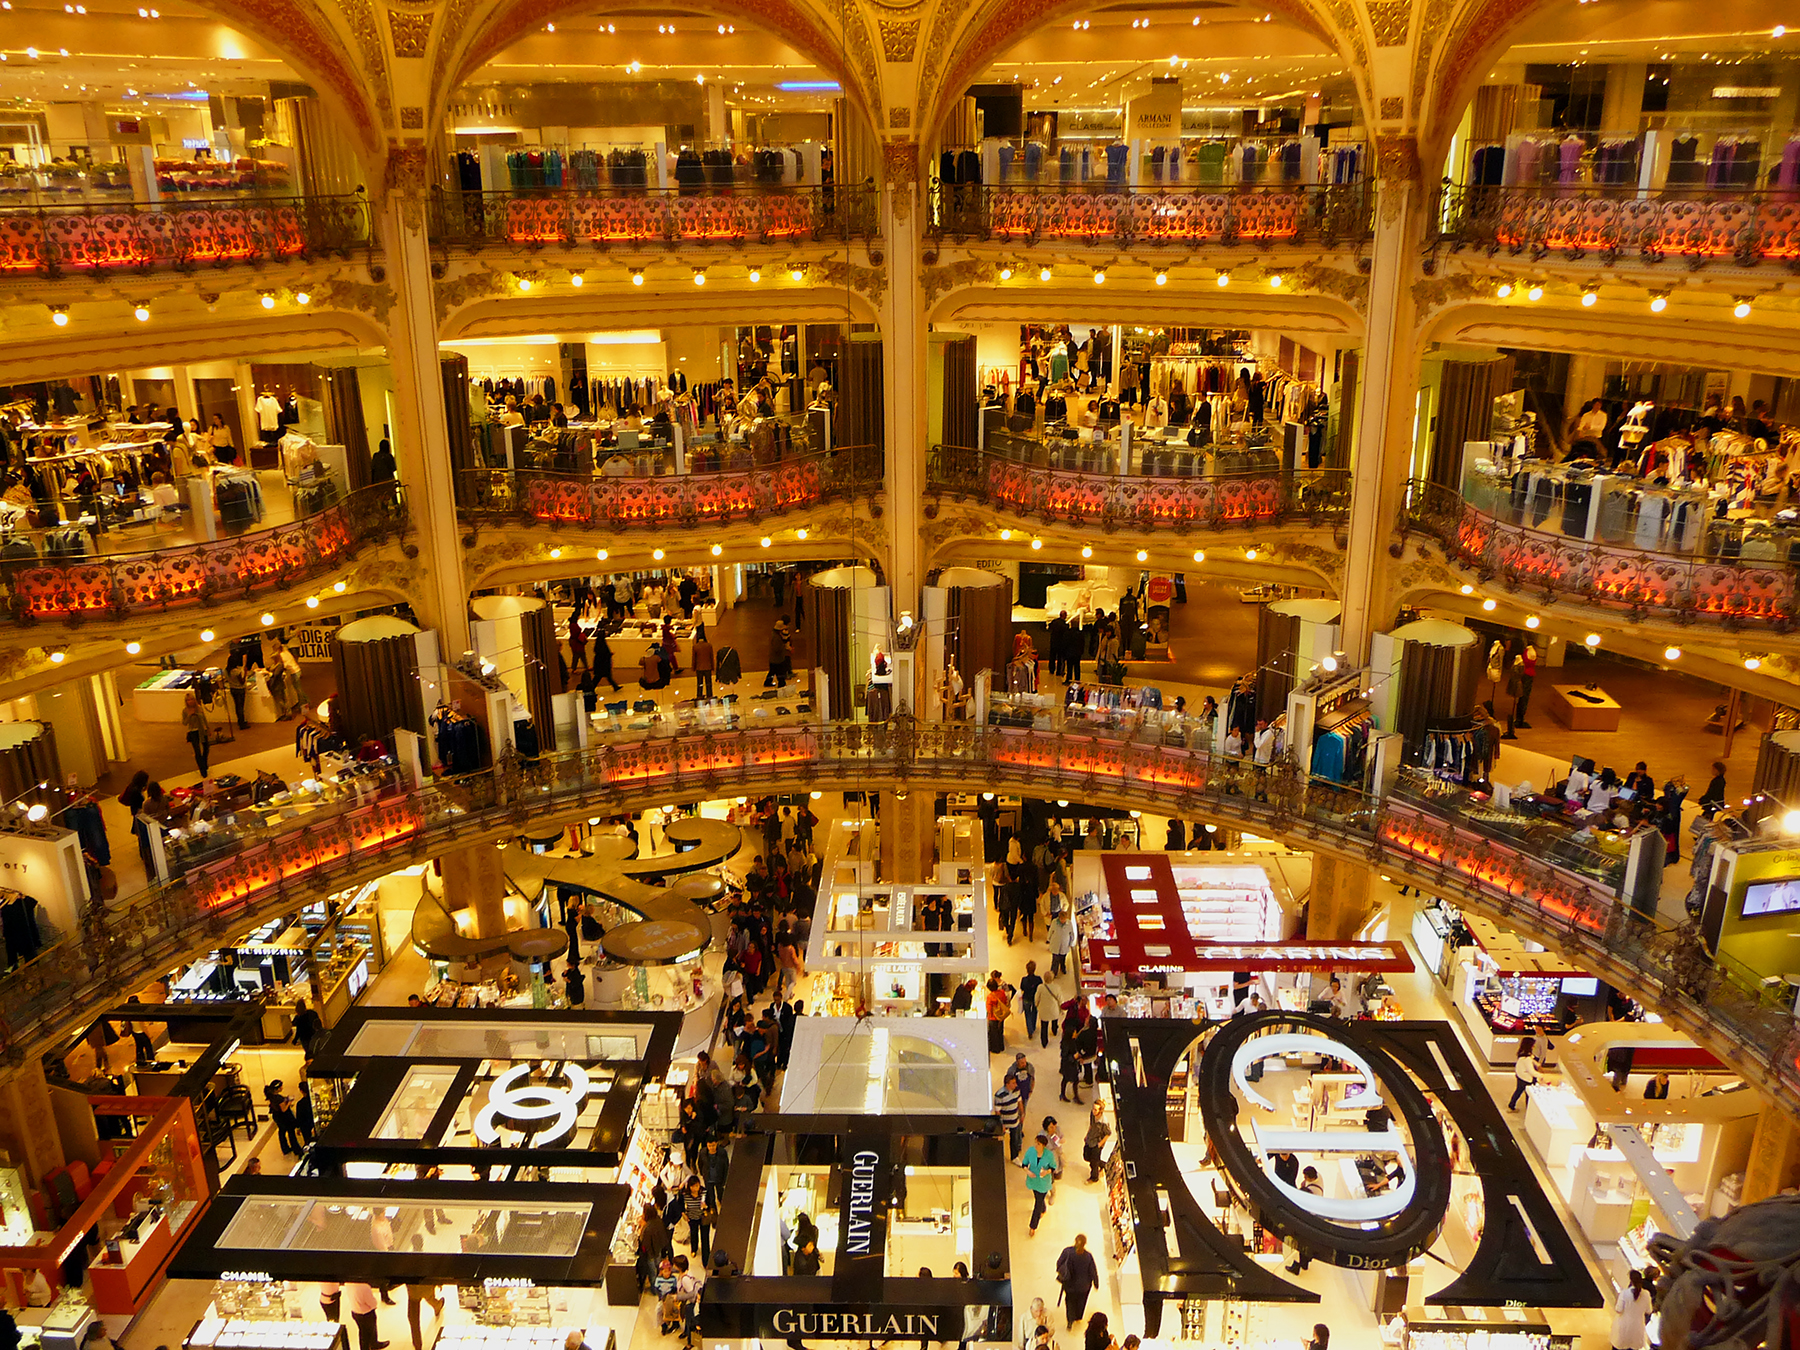 Galeries Lafayette: Europe's Biggest Department Store - France Today